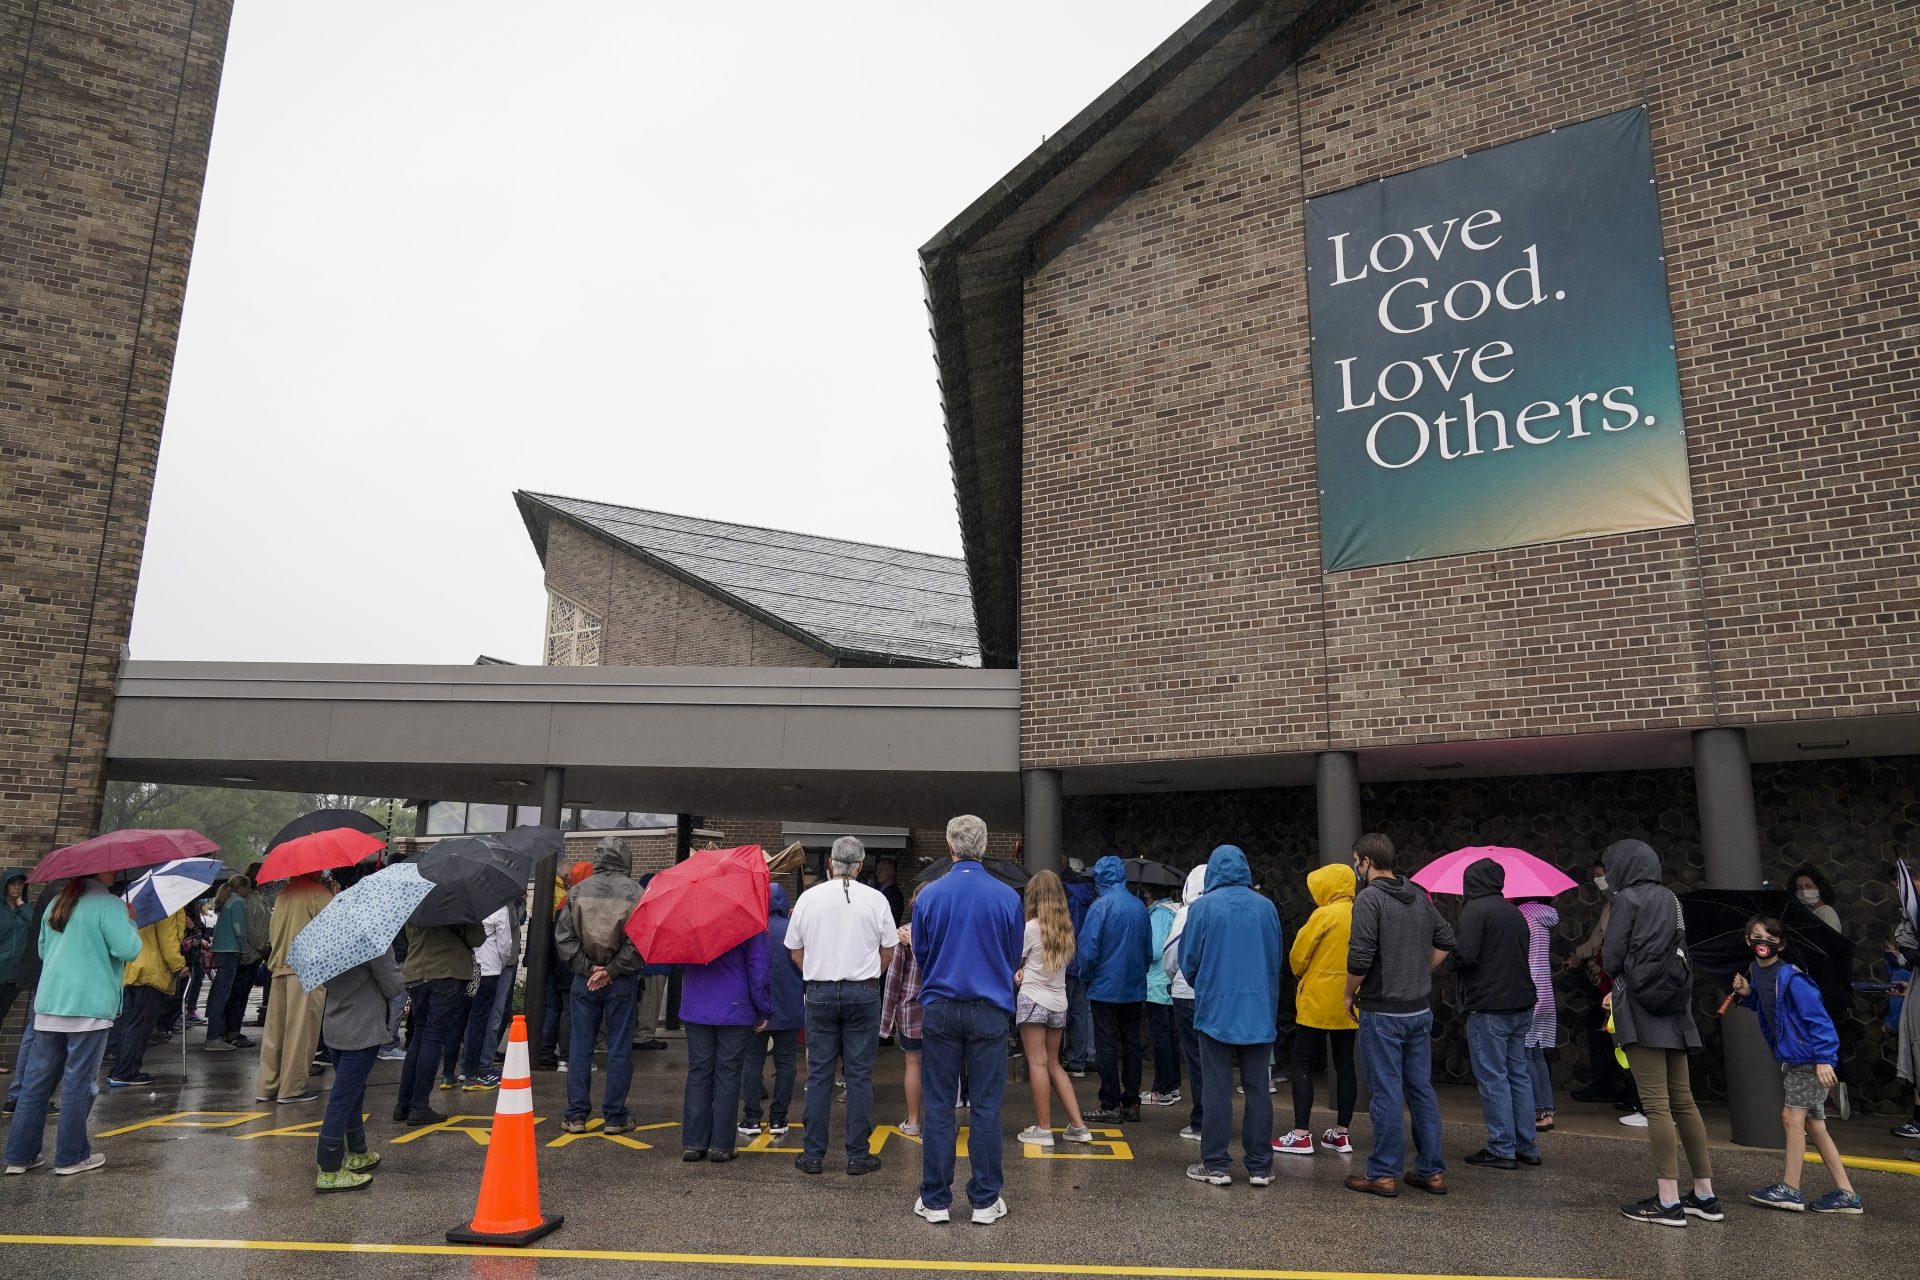 Churchgoers participate in a procession at the Holy Apostles Church in Milwaukee, Saturday, Sept. 12, 2020. For decades, Roman Catholic voters have been a pivotal swing vote in U.S. presidential elections, with a majority backing the winner, whether Republican or Democrat, nearly every time.